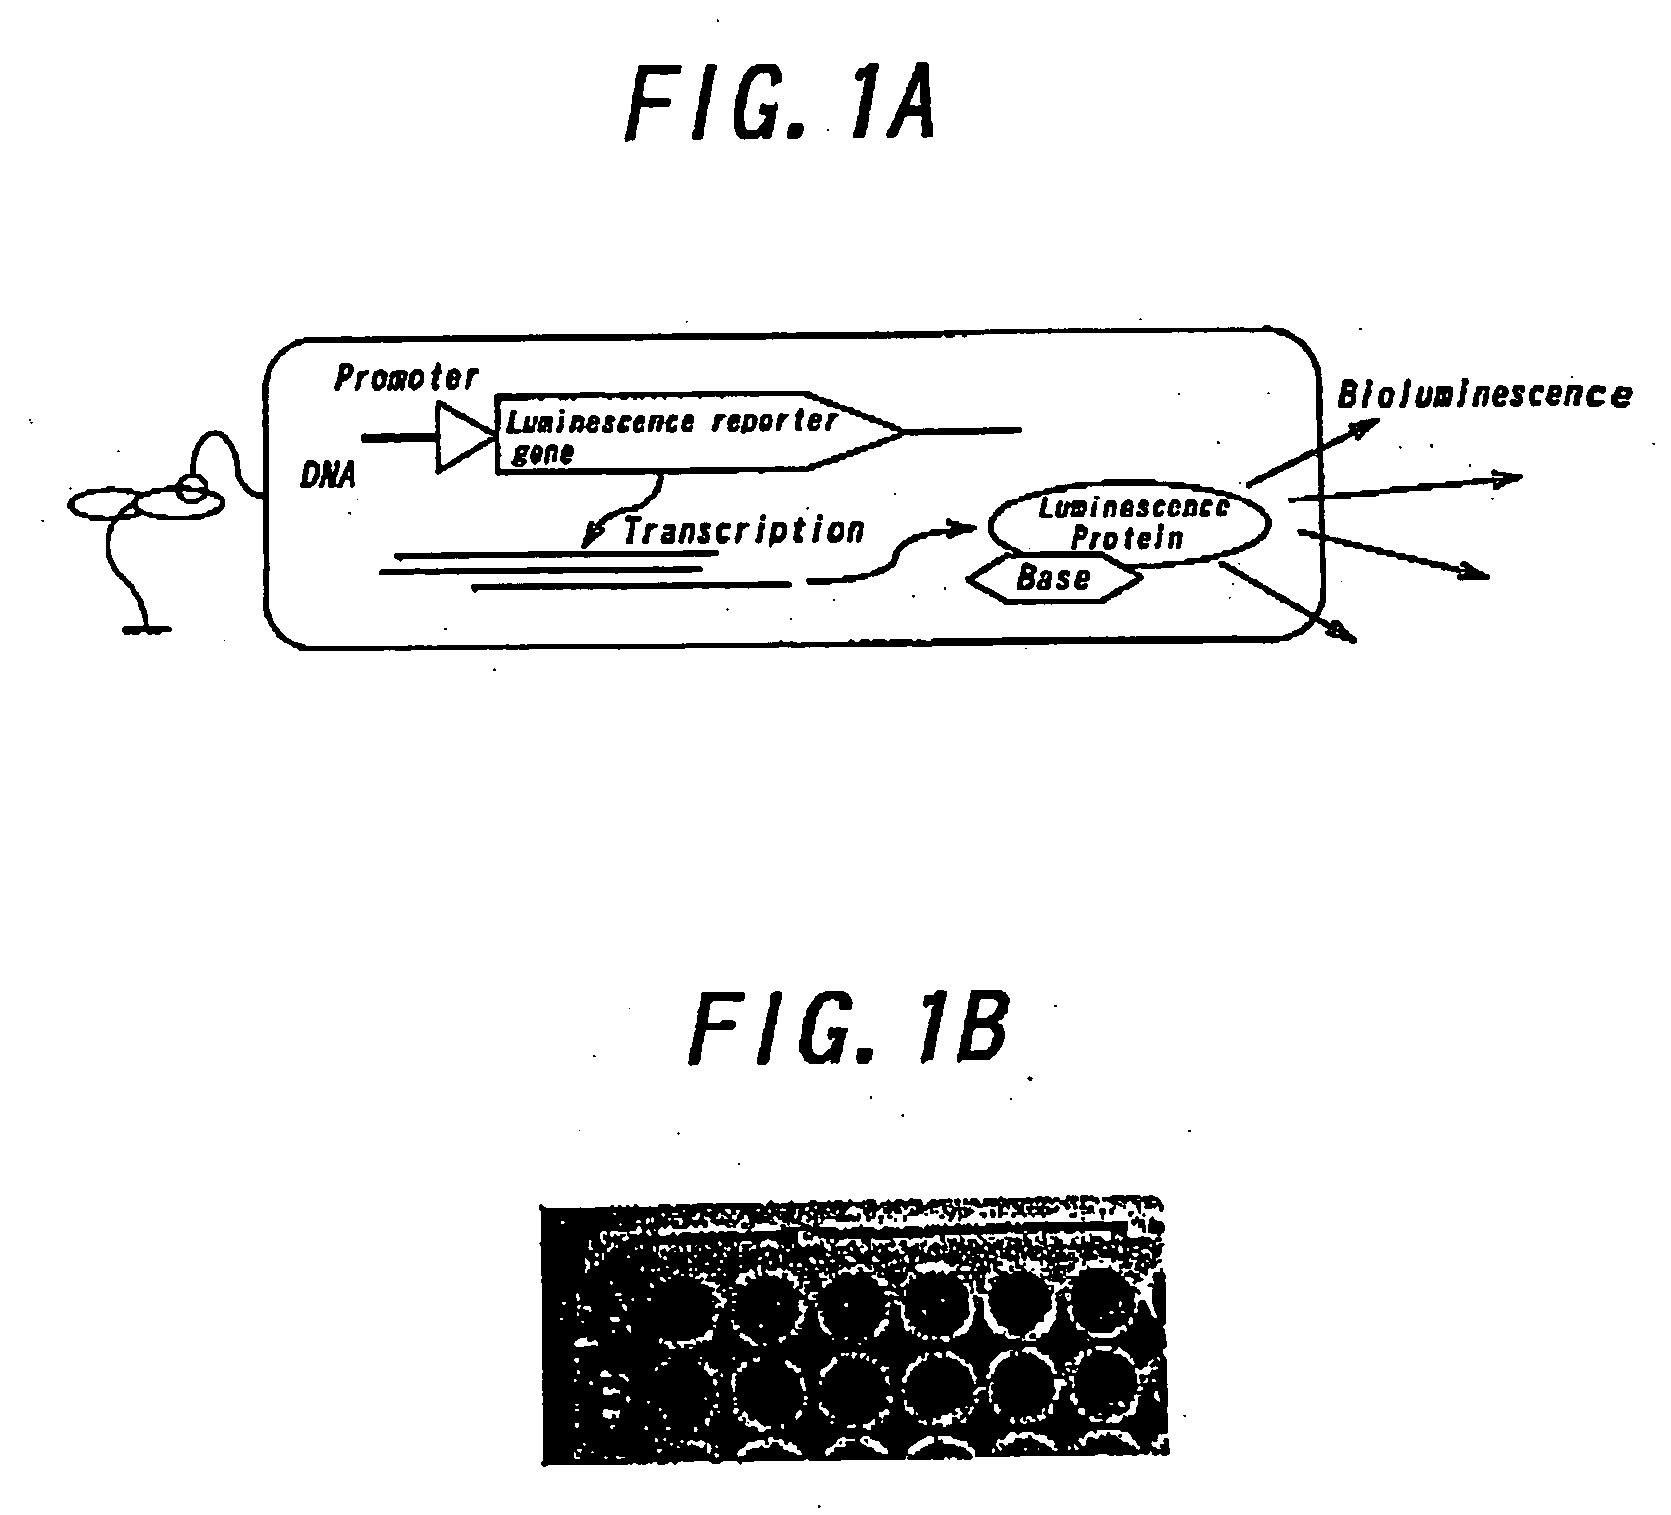 Method for measuring and analyzing bioluminescence and device for measuring and analyzing bioluminescence